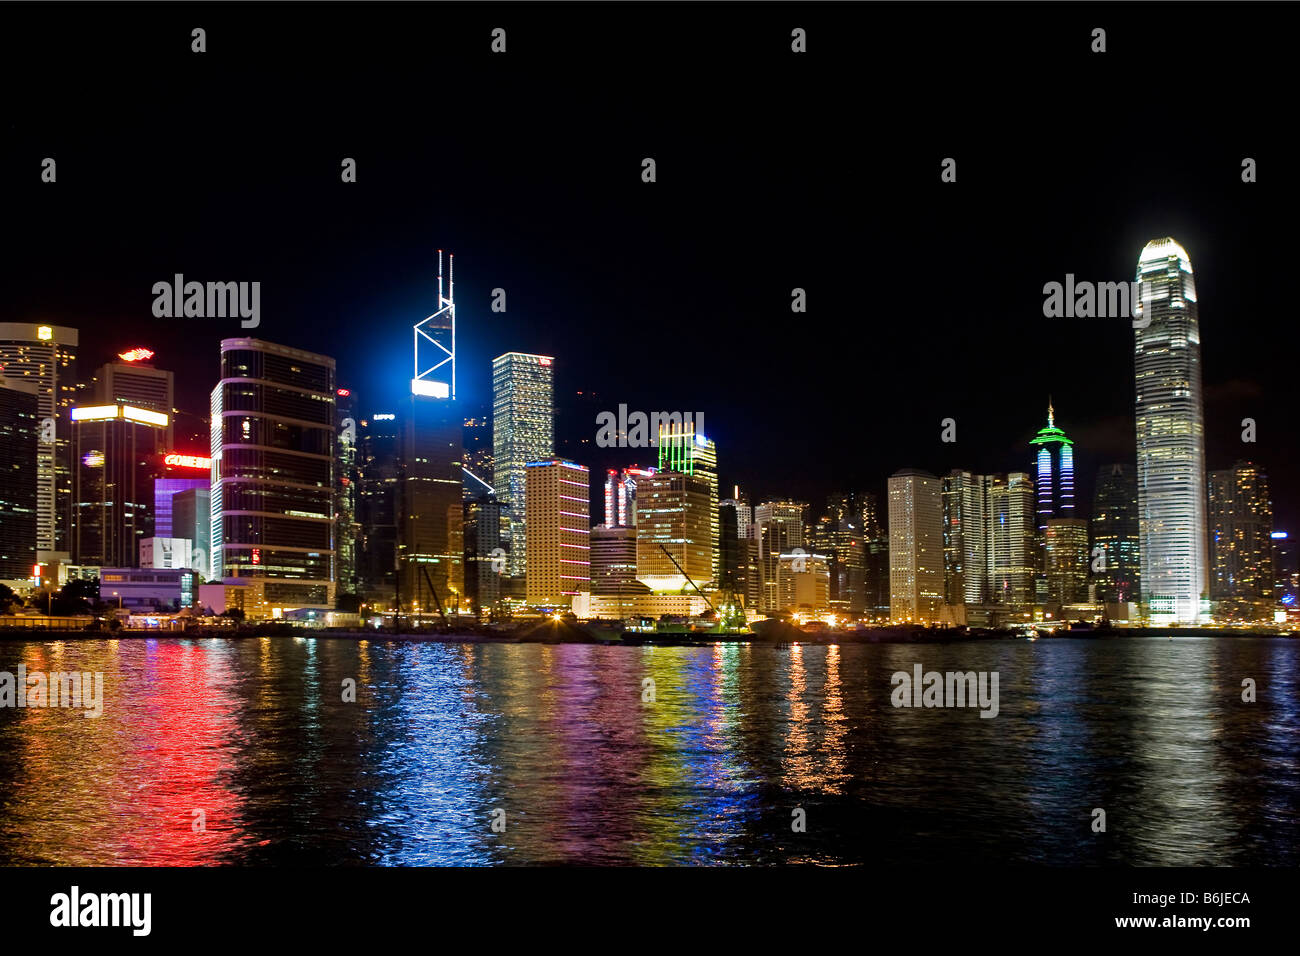 Hong Kong districts of Admiralty/Central as seen at night from across ...